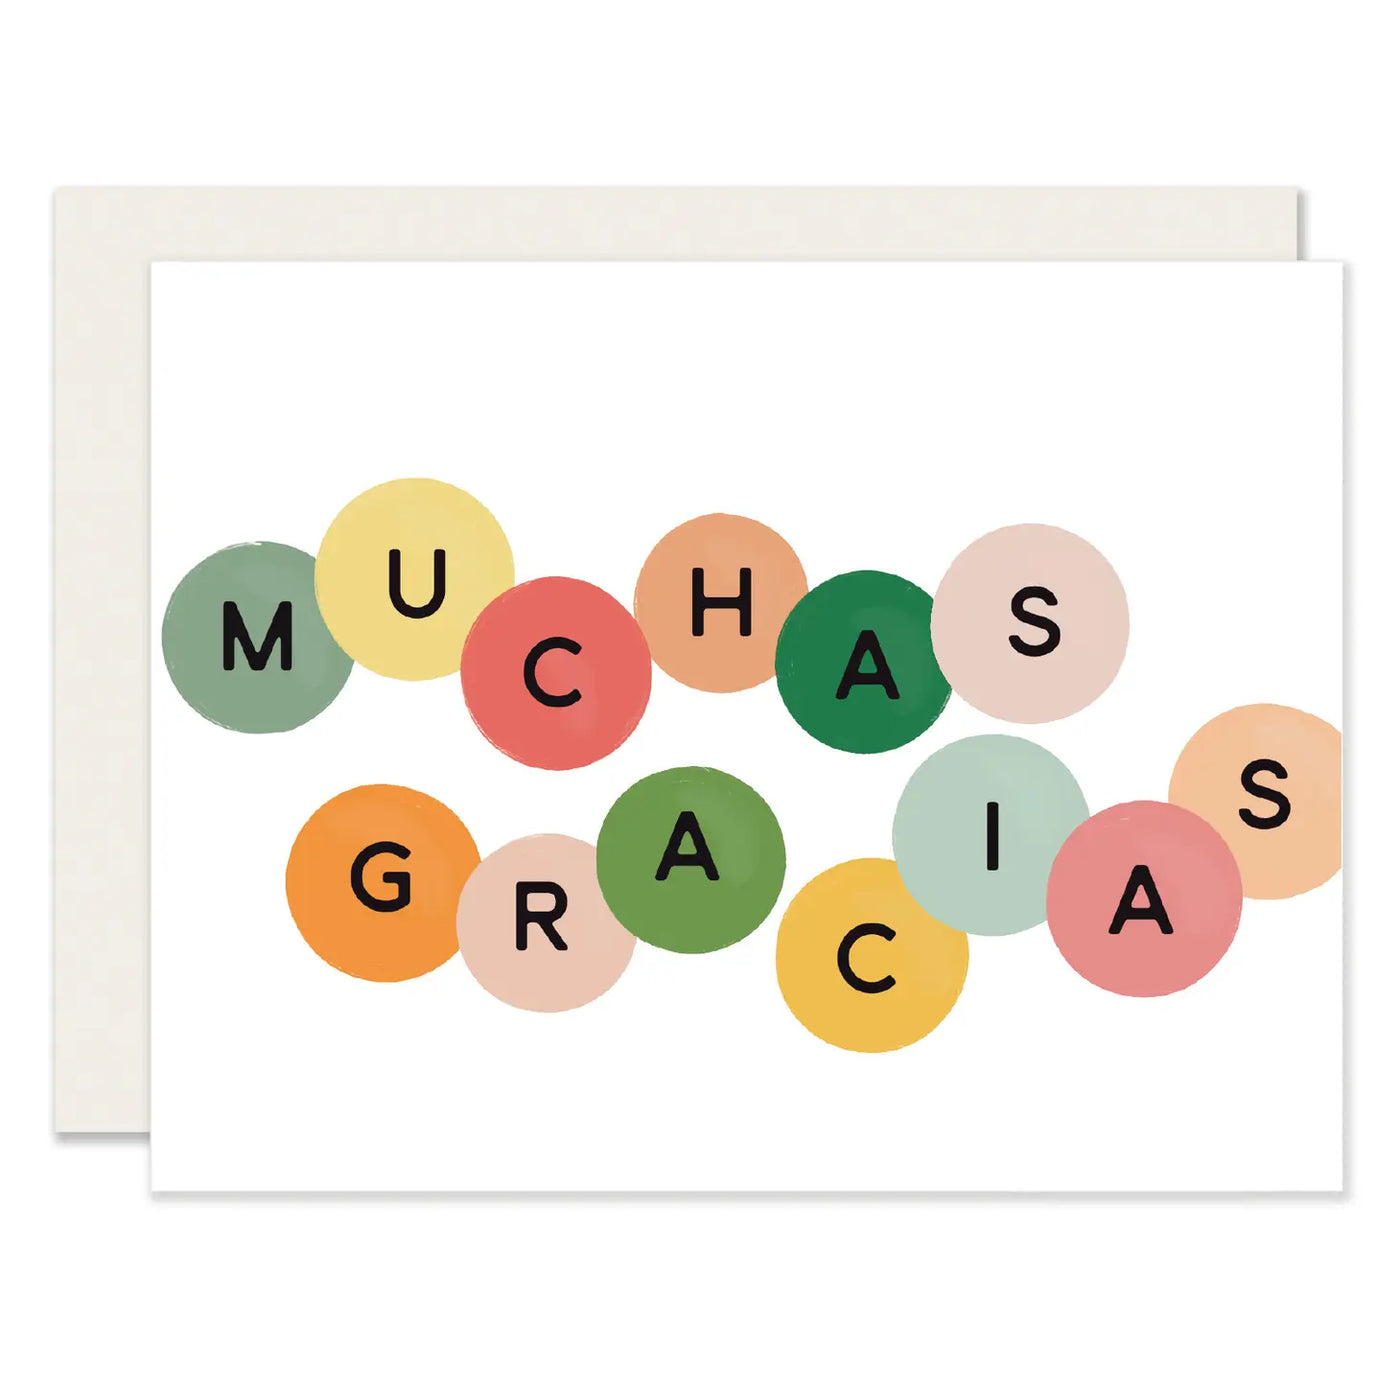 Greeting card reads Muchas Gracias, English translation is Thank you, in a colorful circle illustration.